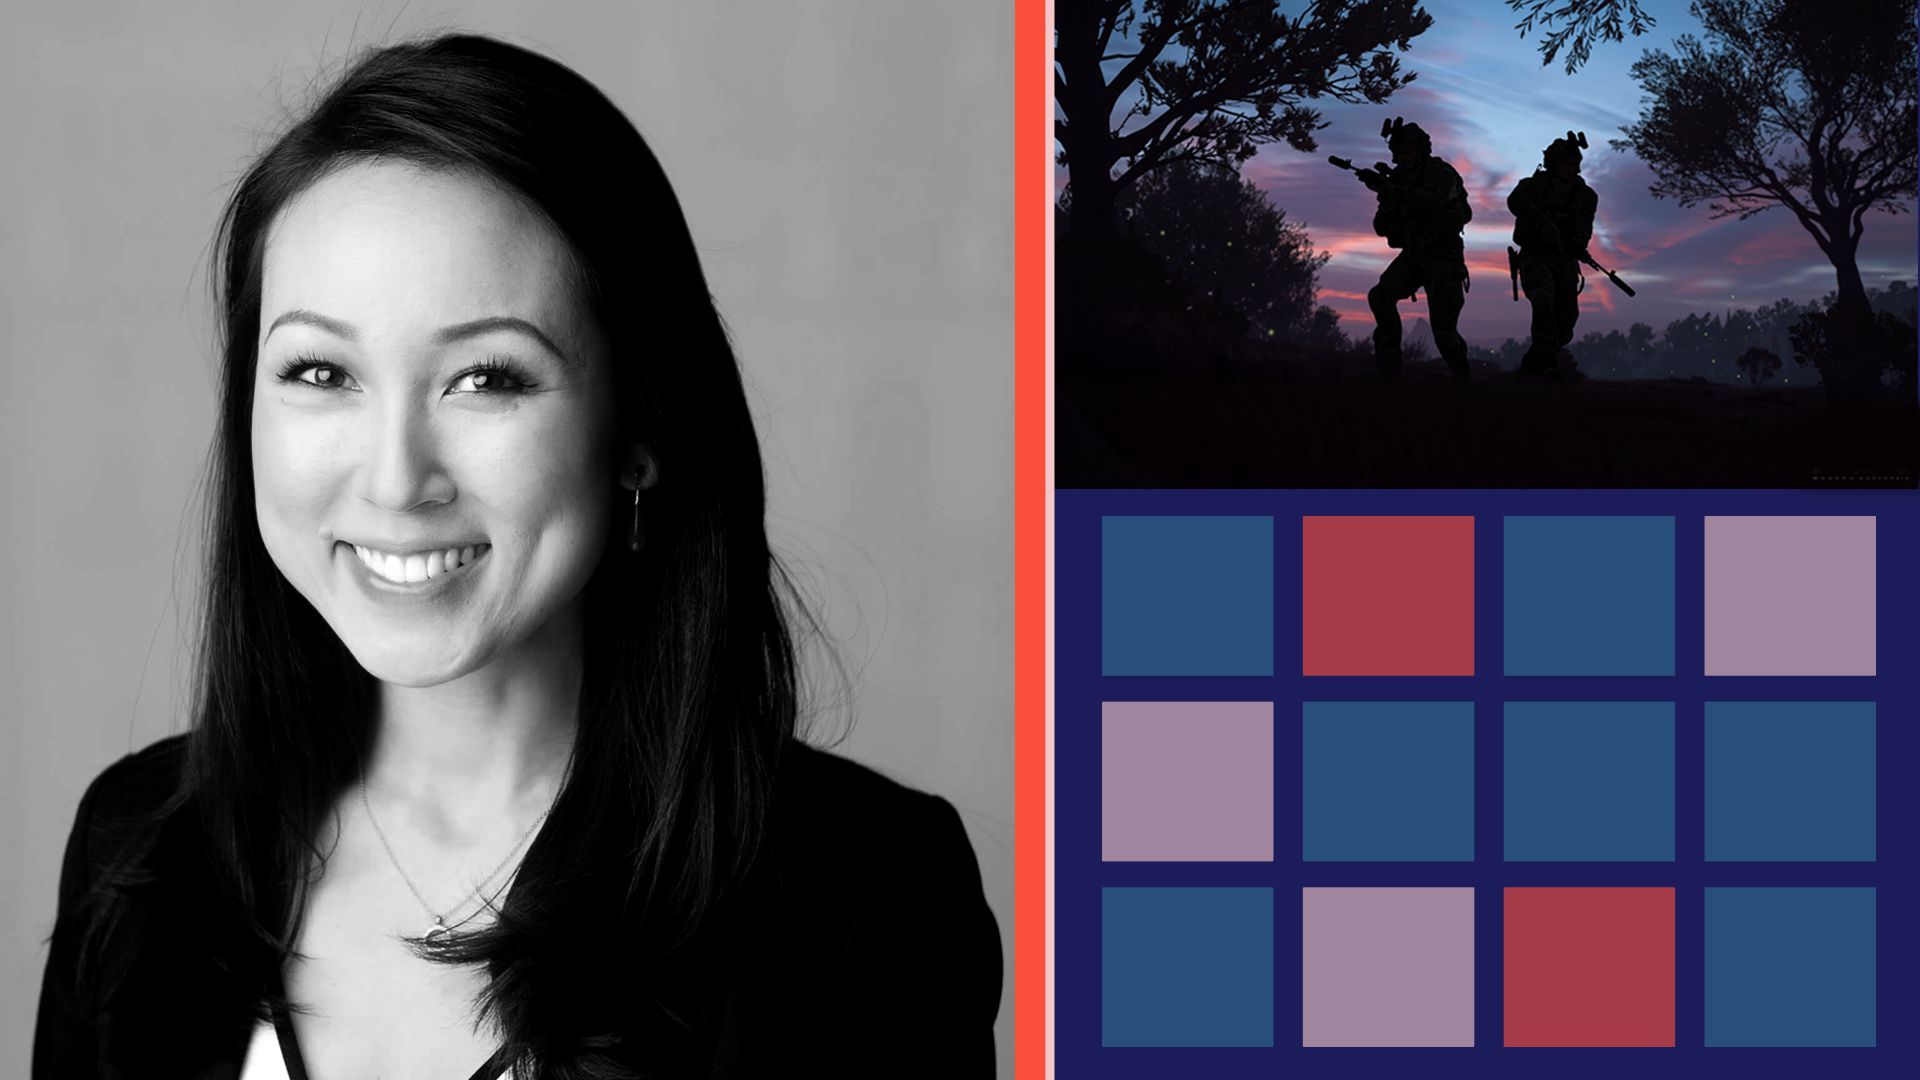 Photo illustration of  Executive Vice President, Corporate Affairs and Chief Communications at Activision Blizzard  Lulu Cheng Meservey with screen shot of Call of Duty and various shapes